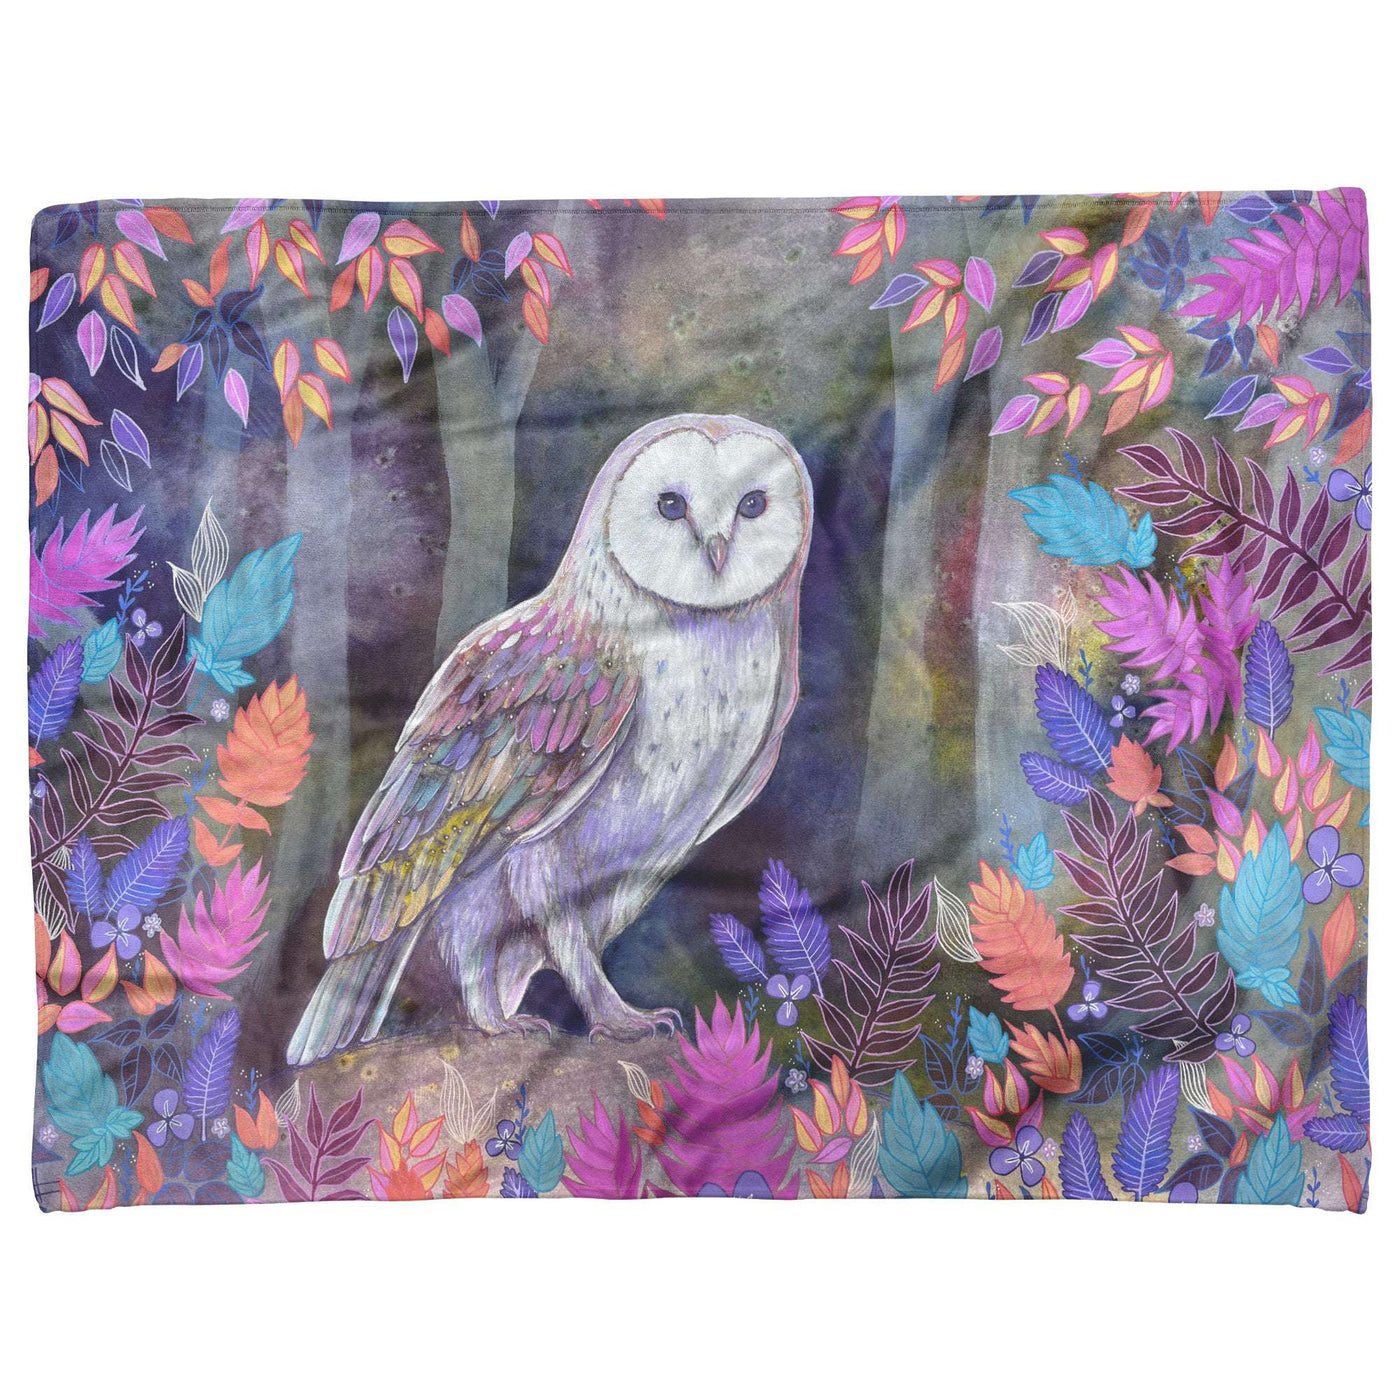 A full view of fleece blanket with a white owl perched among colorful leaves on a purple and blue watercolor background.